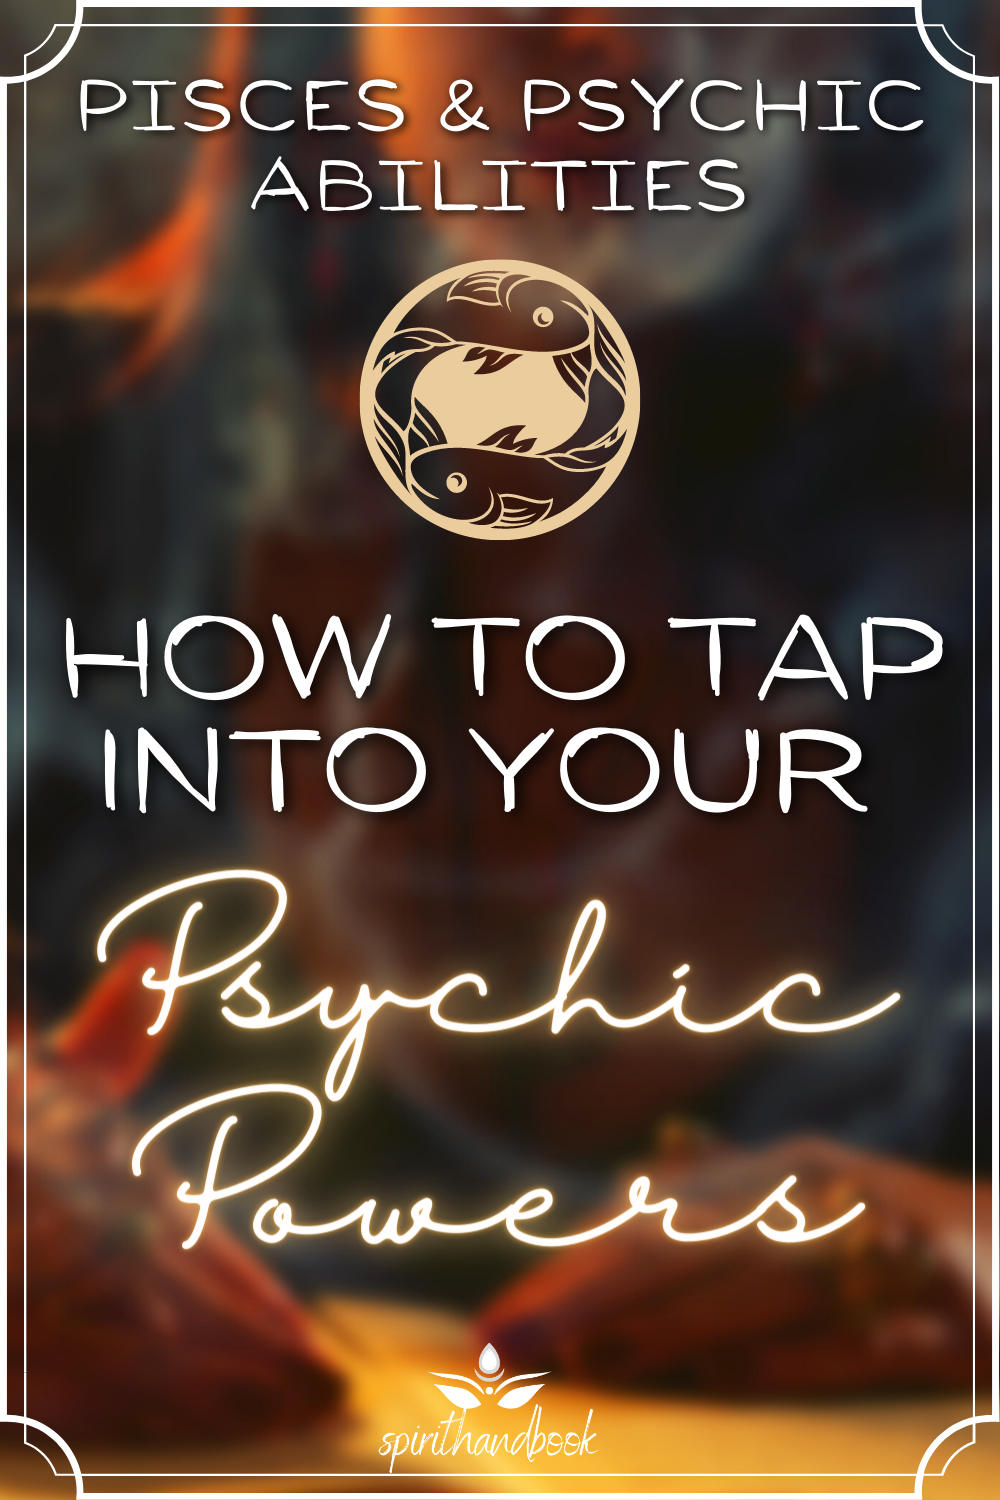 Pisces and Psychic Abilities: How To Tap Into Your Psychic Powers